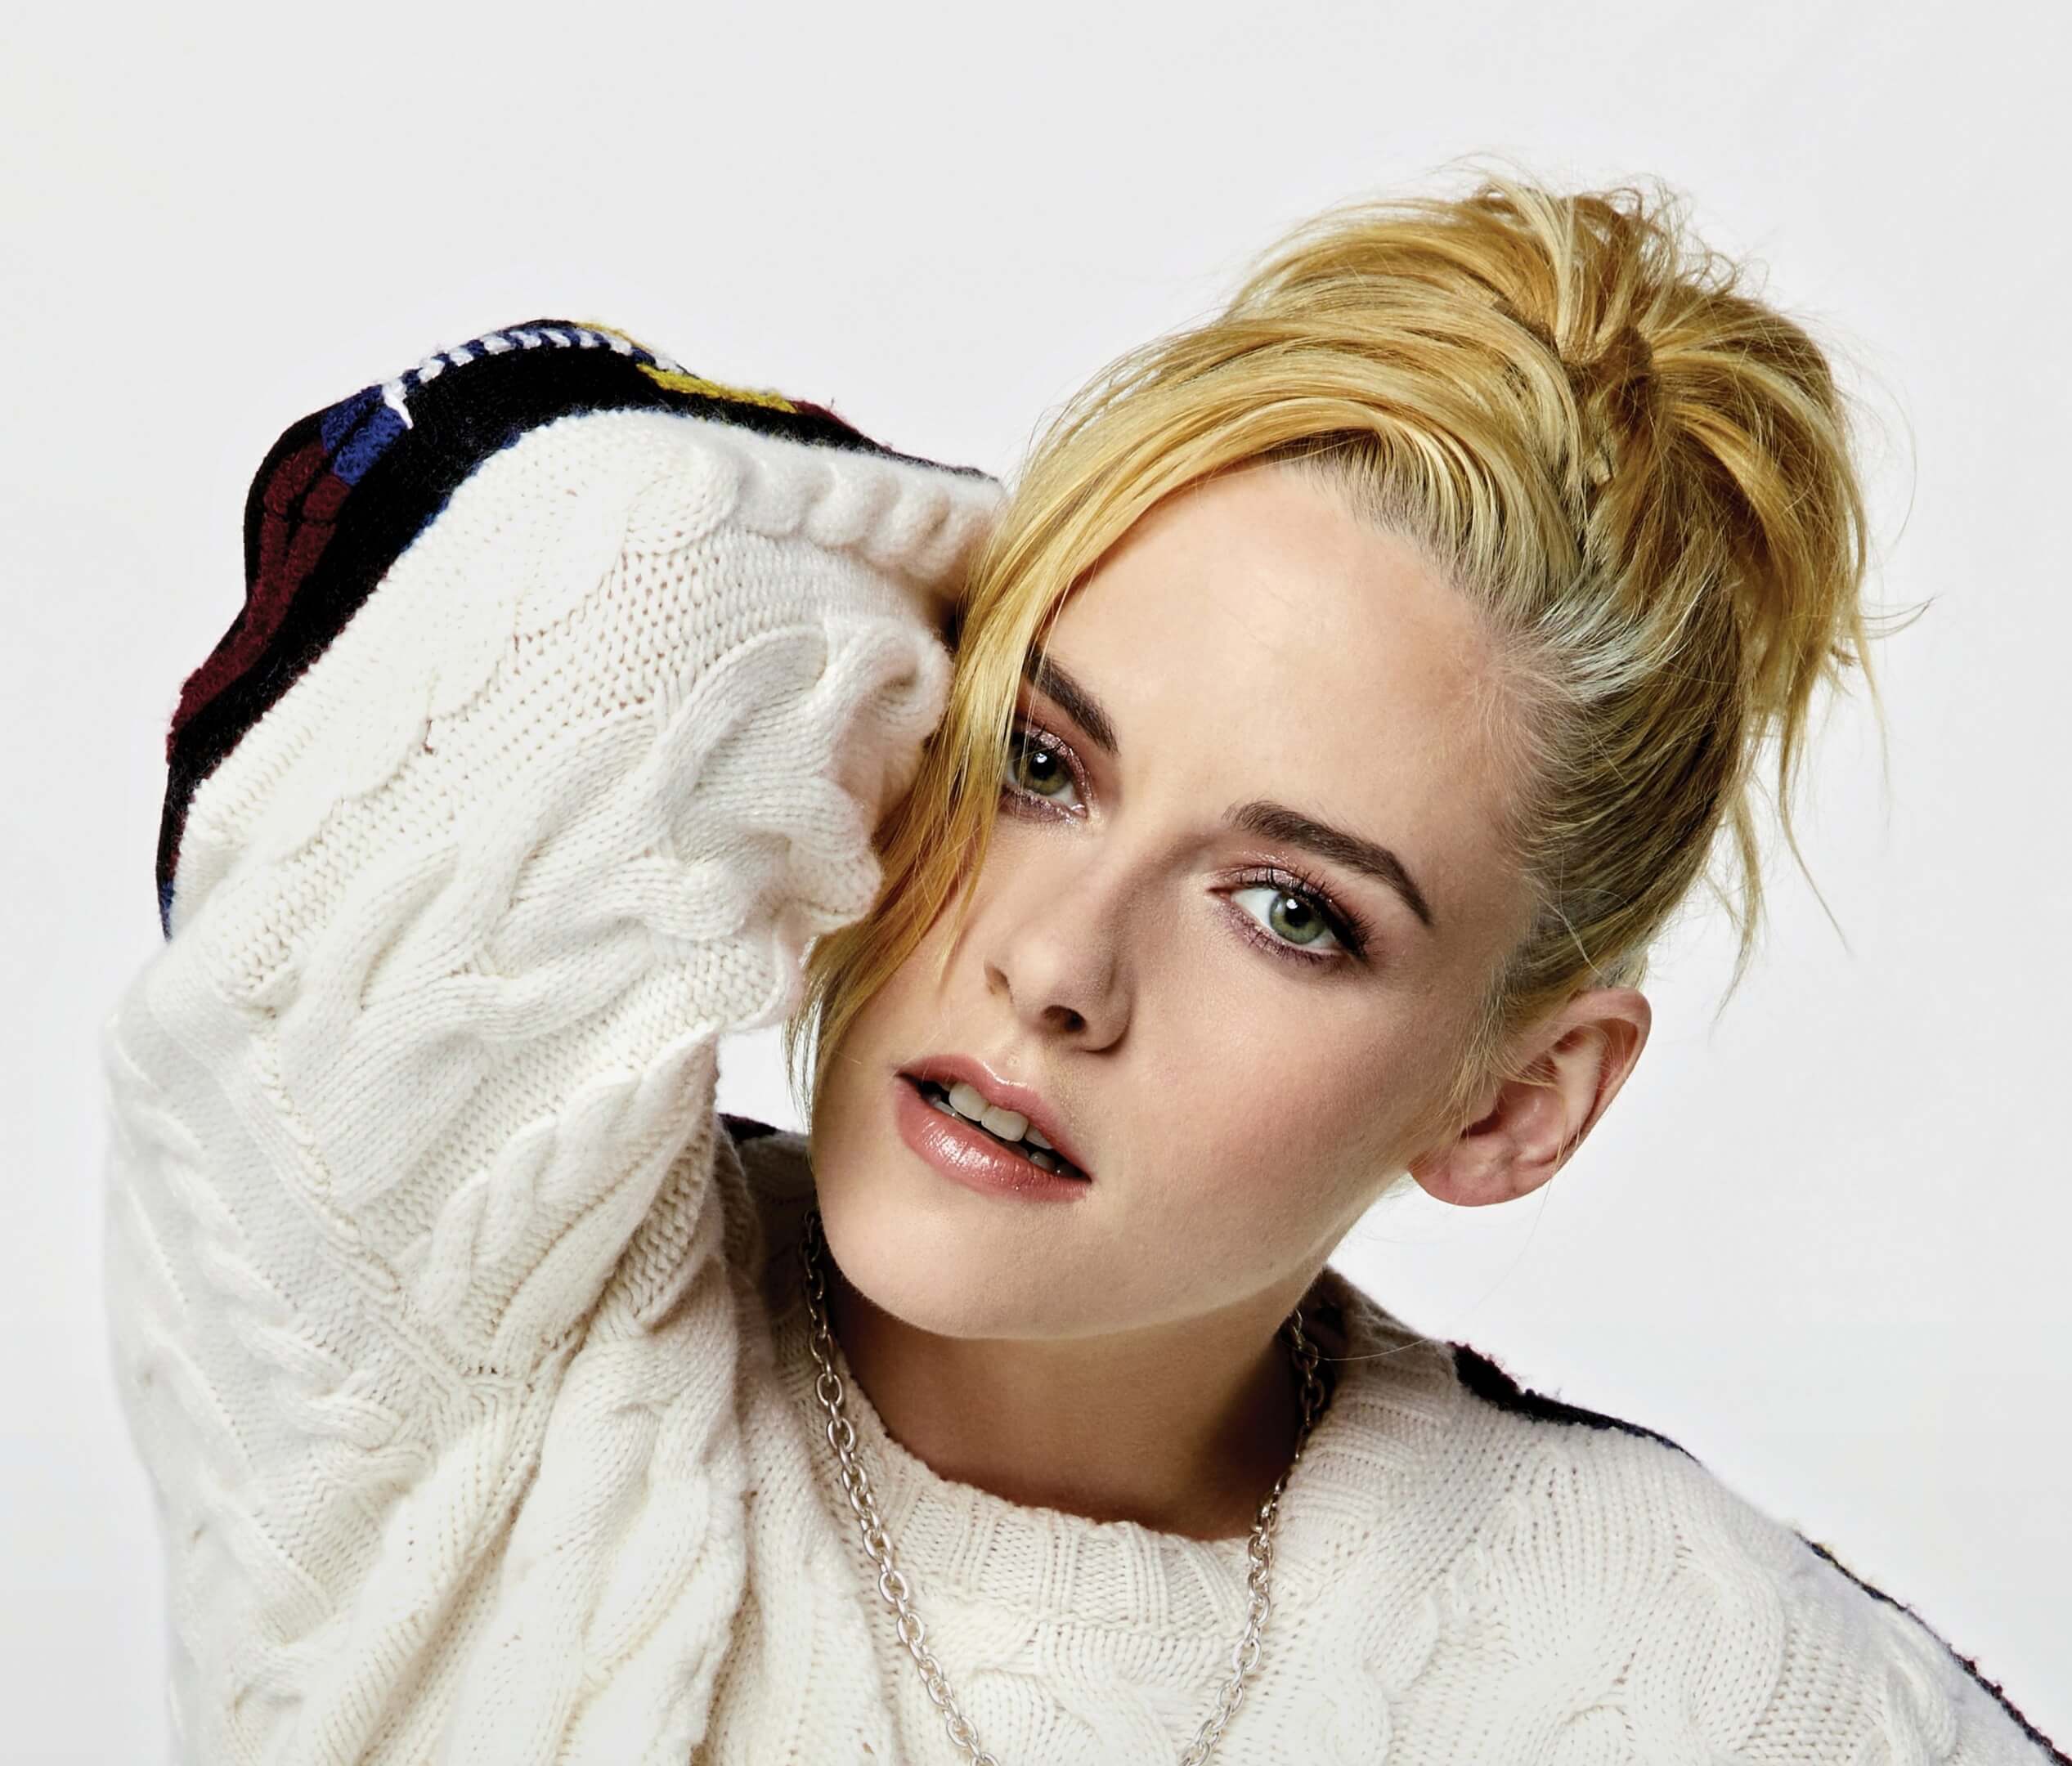 Kristen Stewart on ‘Spencer’ and Her Oscar Buzz: ‘We Don’t Make Movies to Not Connect With Each Other’